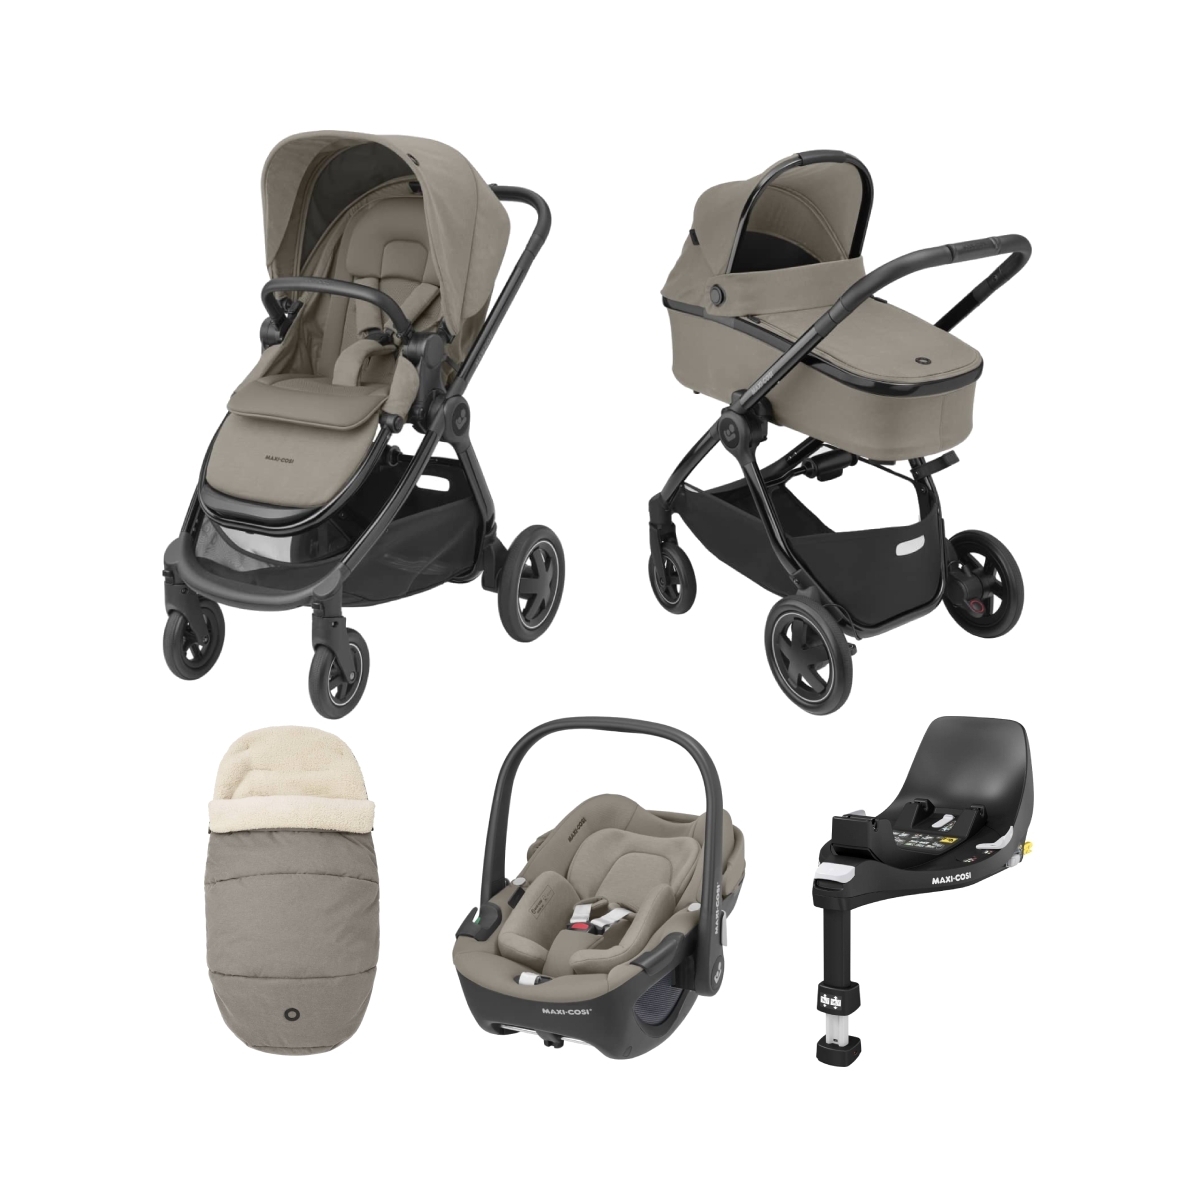 Maxi Cosi Adorra Luxe 360 3in1 Travel System with Chrome Chassis